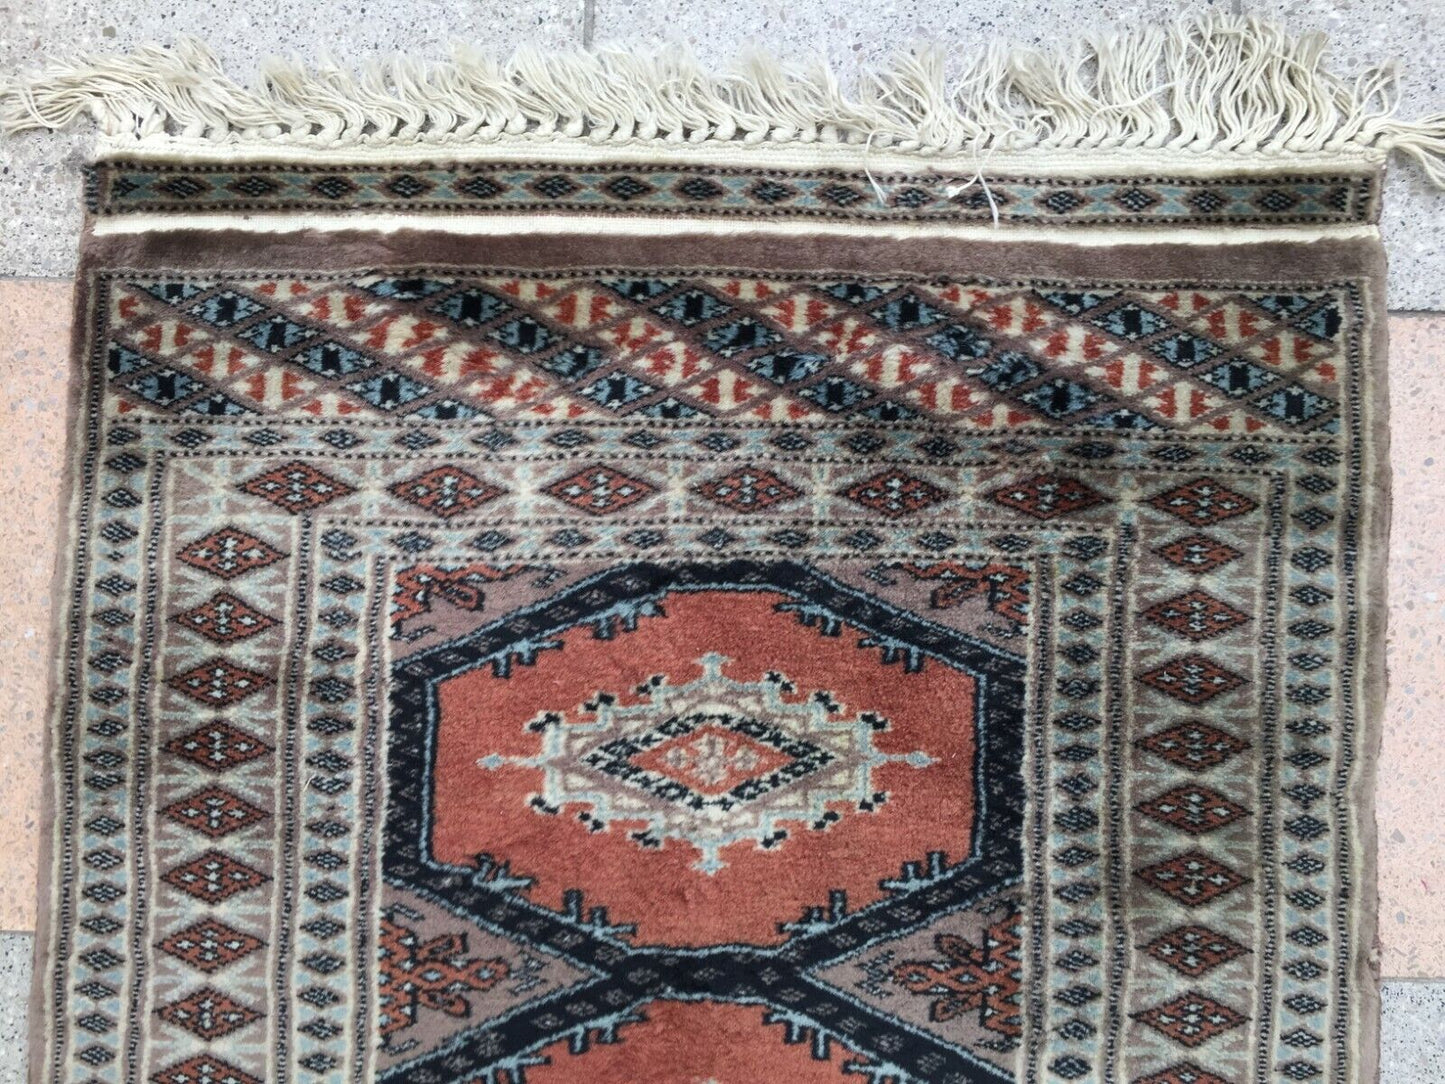 Intricate Geometric Surroundings with Various Shades of Blue, White, and Brown on Bukhara Rug - 1960s